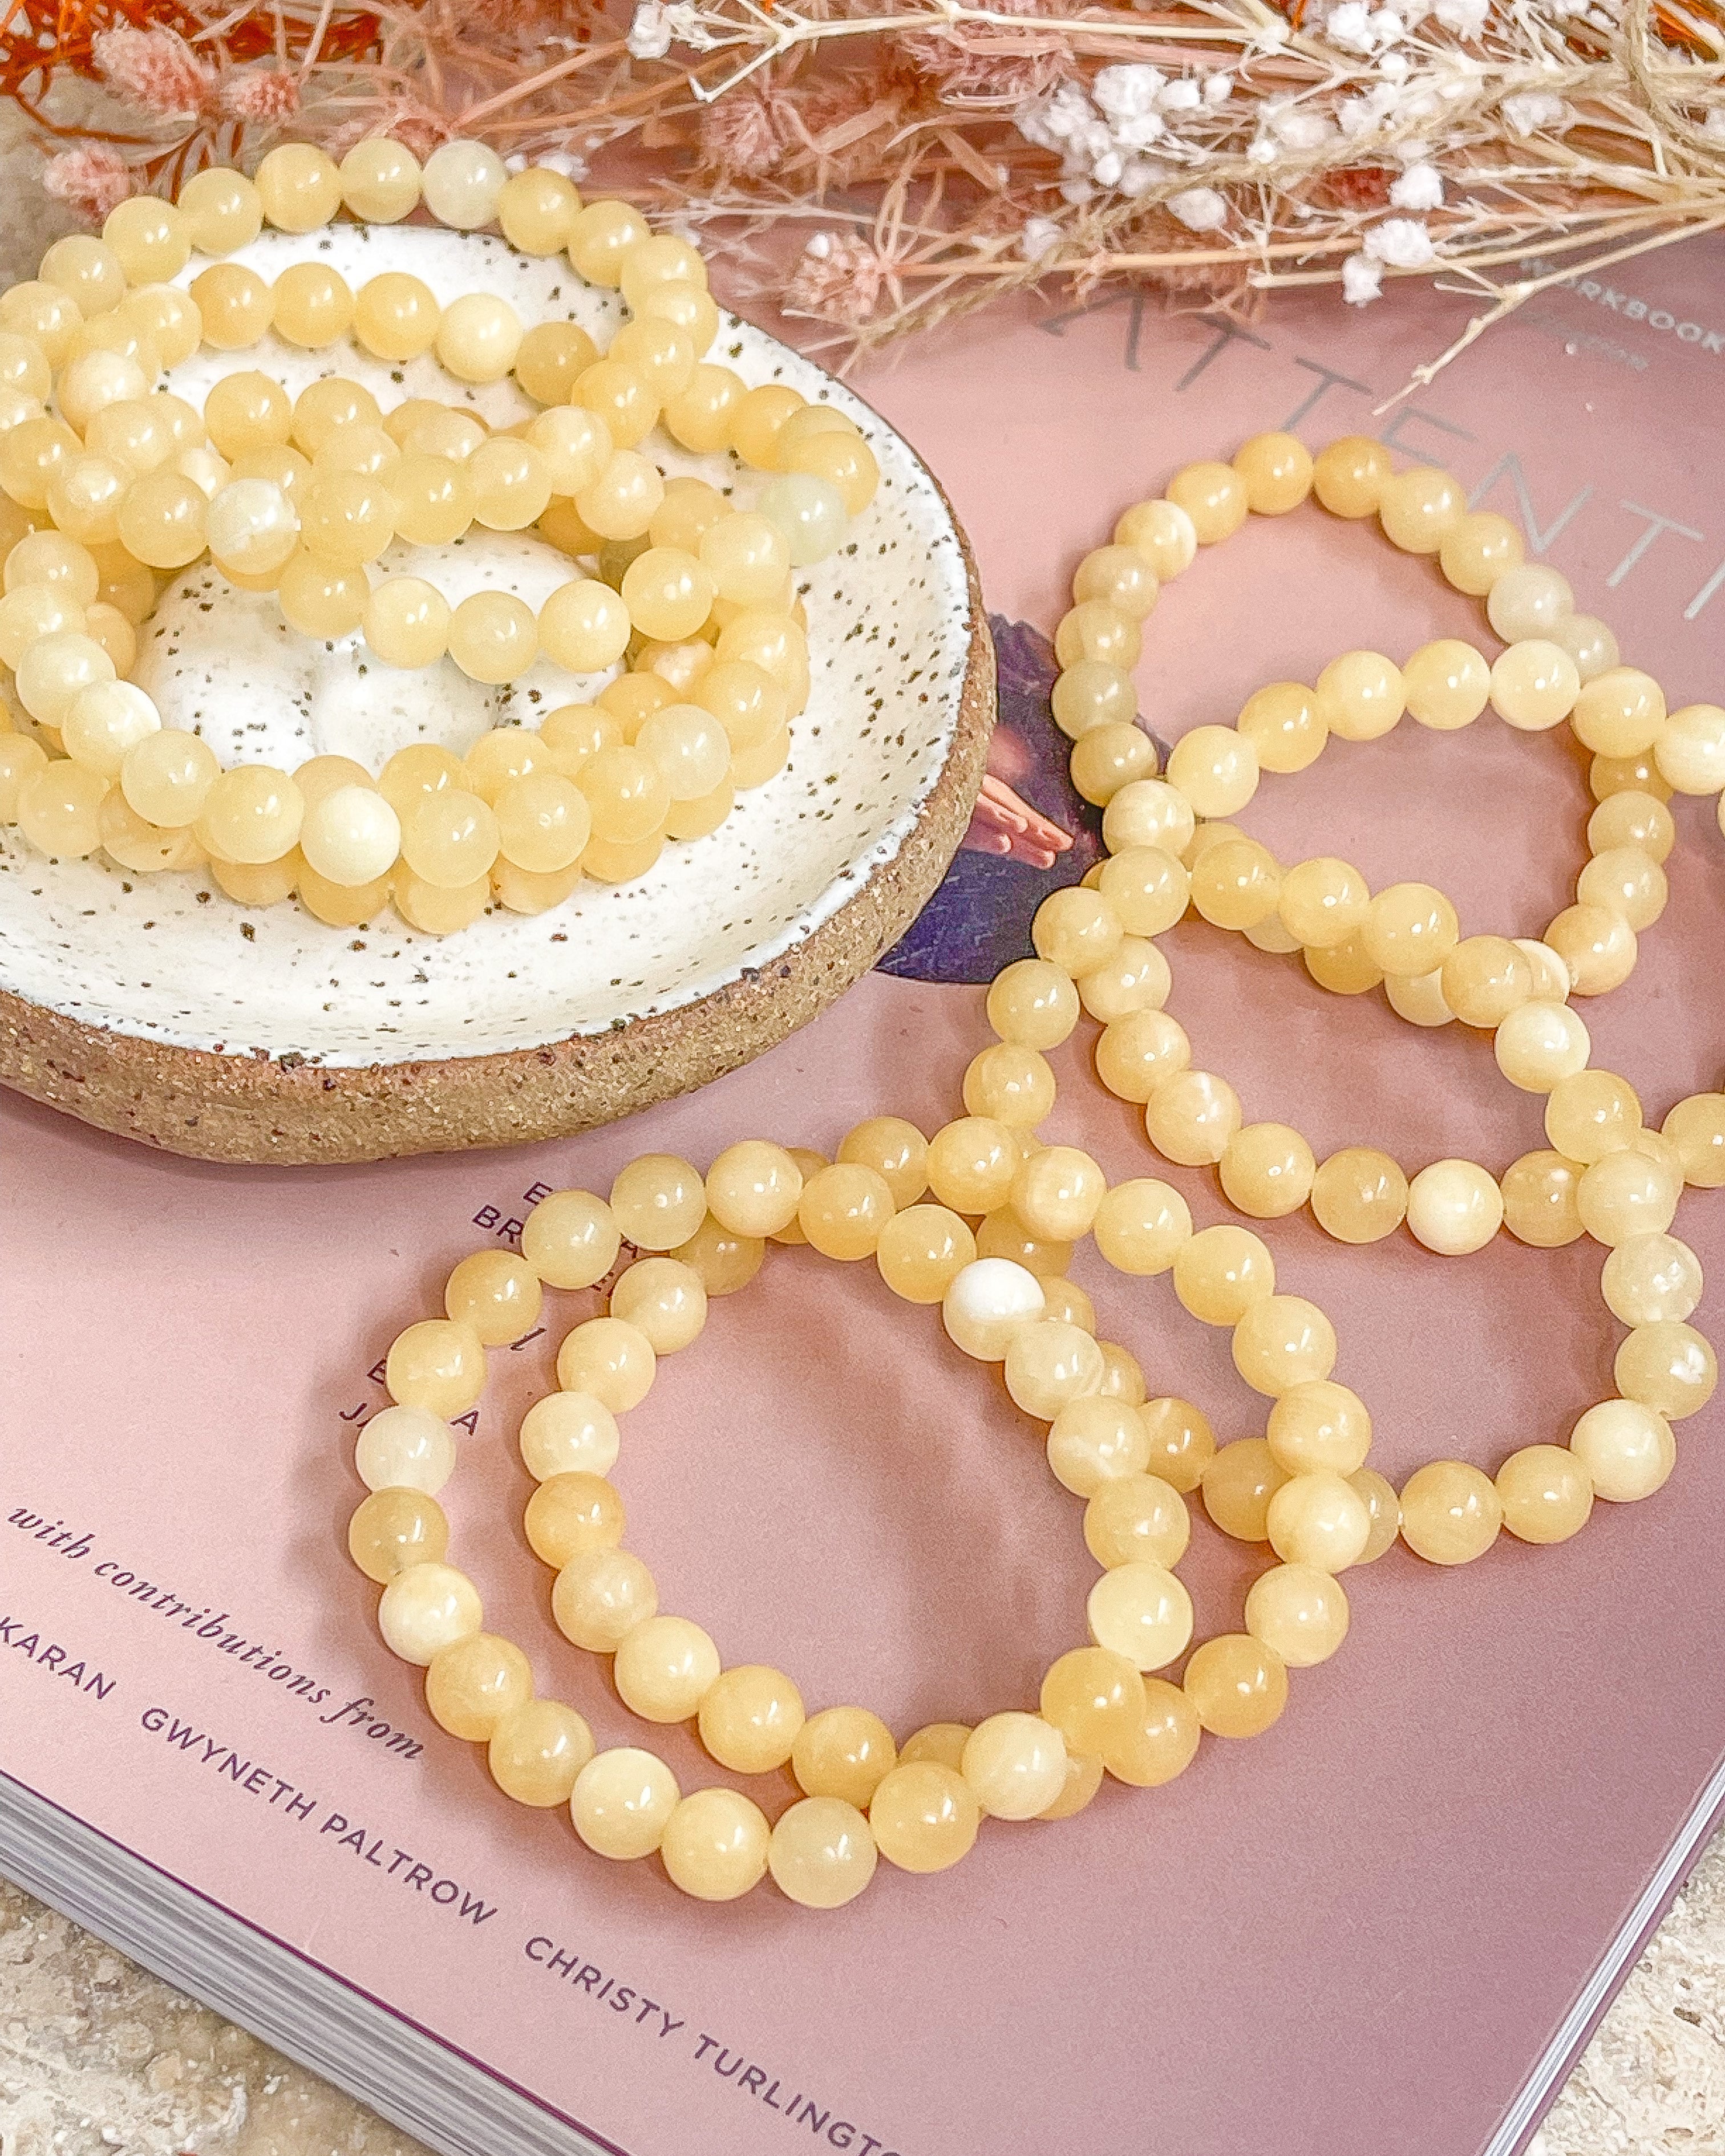 Yellow Calcite Bead Bracelets // Opportunities + Intellect + Self Confidence